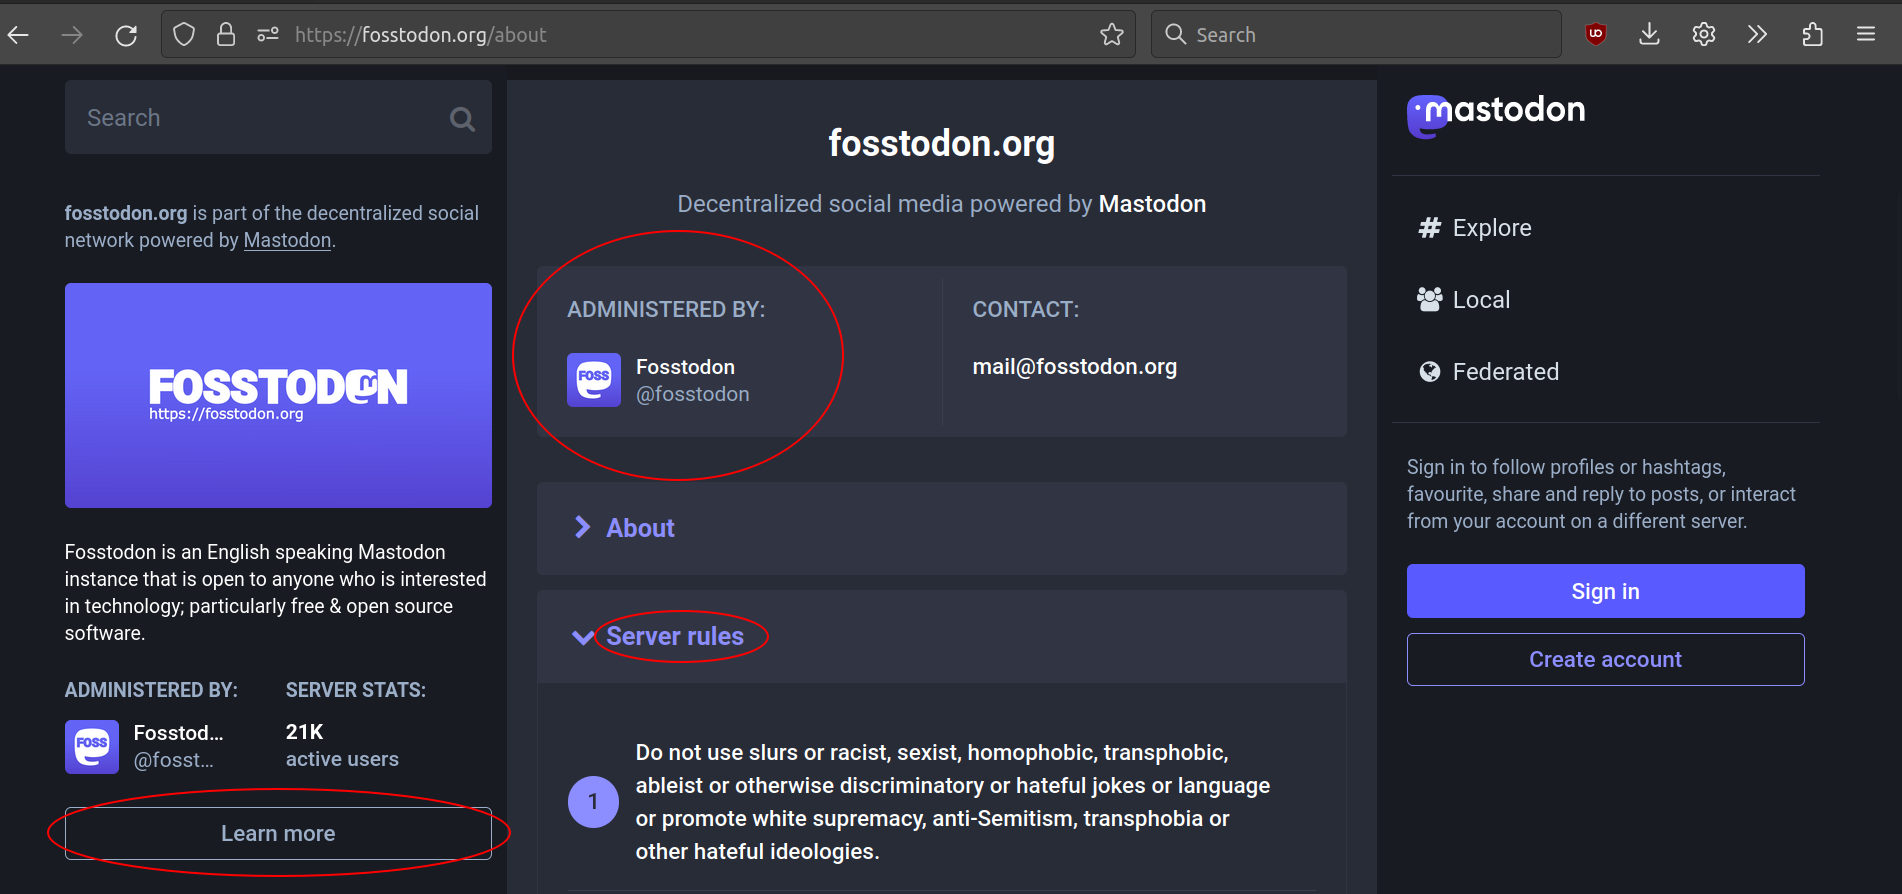 Screenshot from Fosstodon showing the location of the server rules and admin information